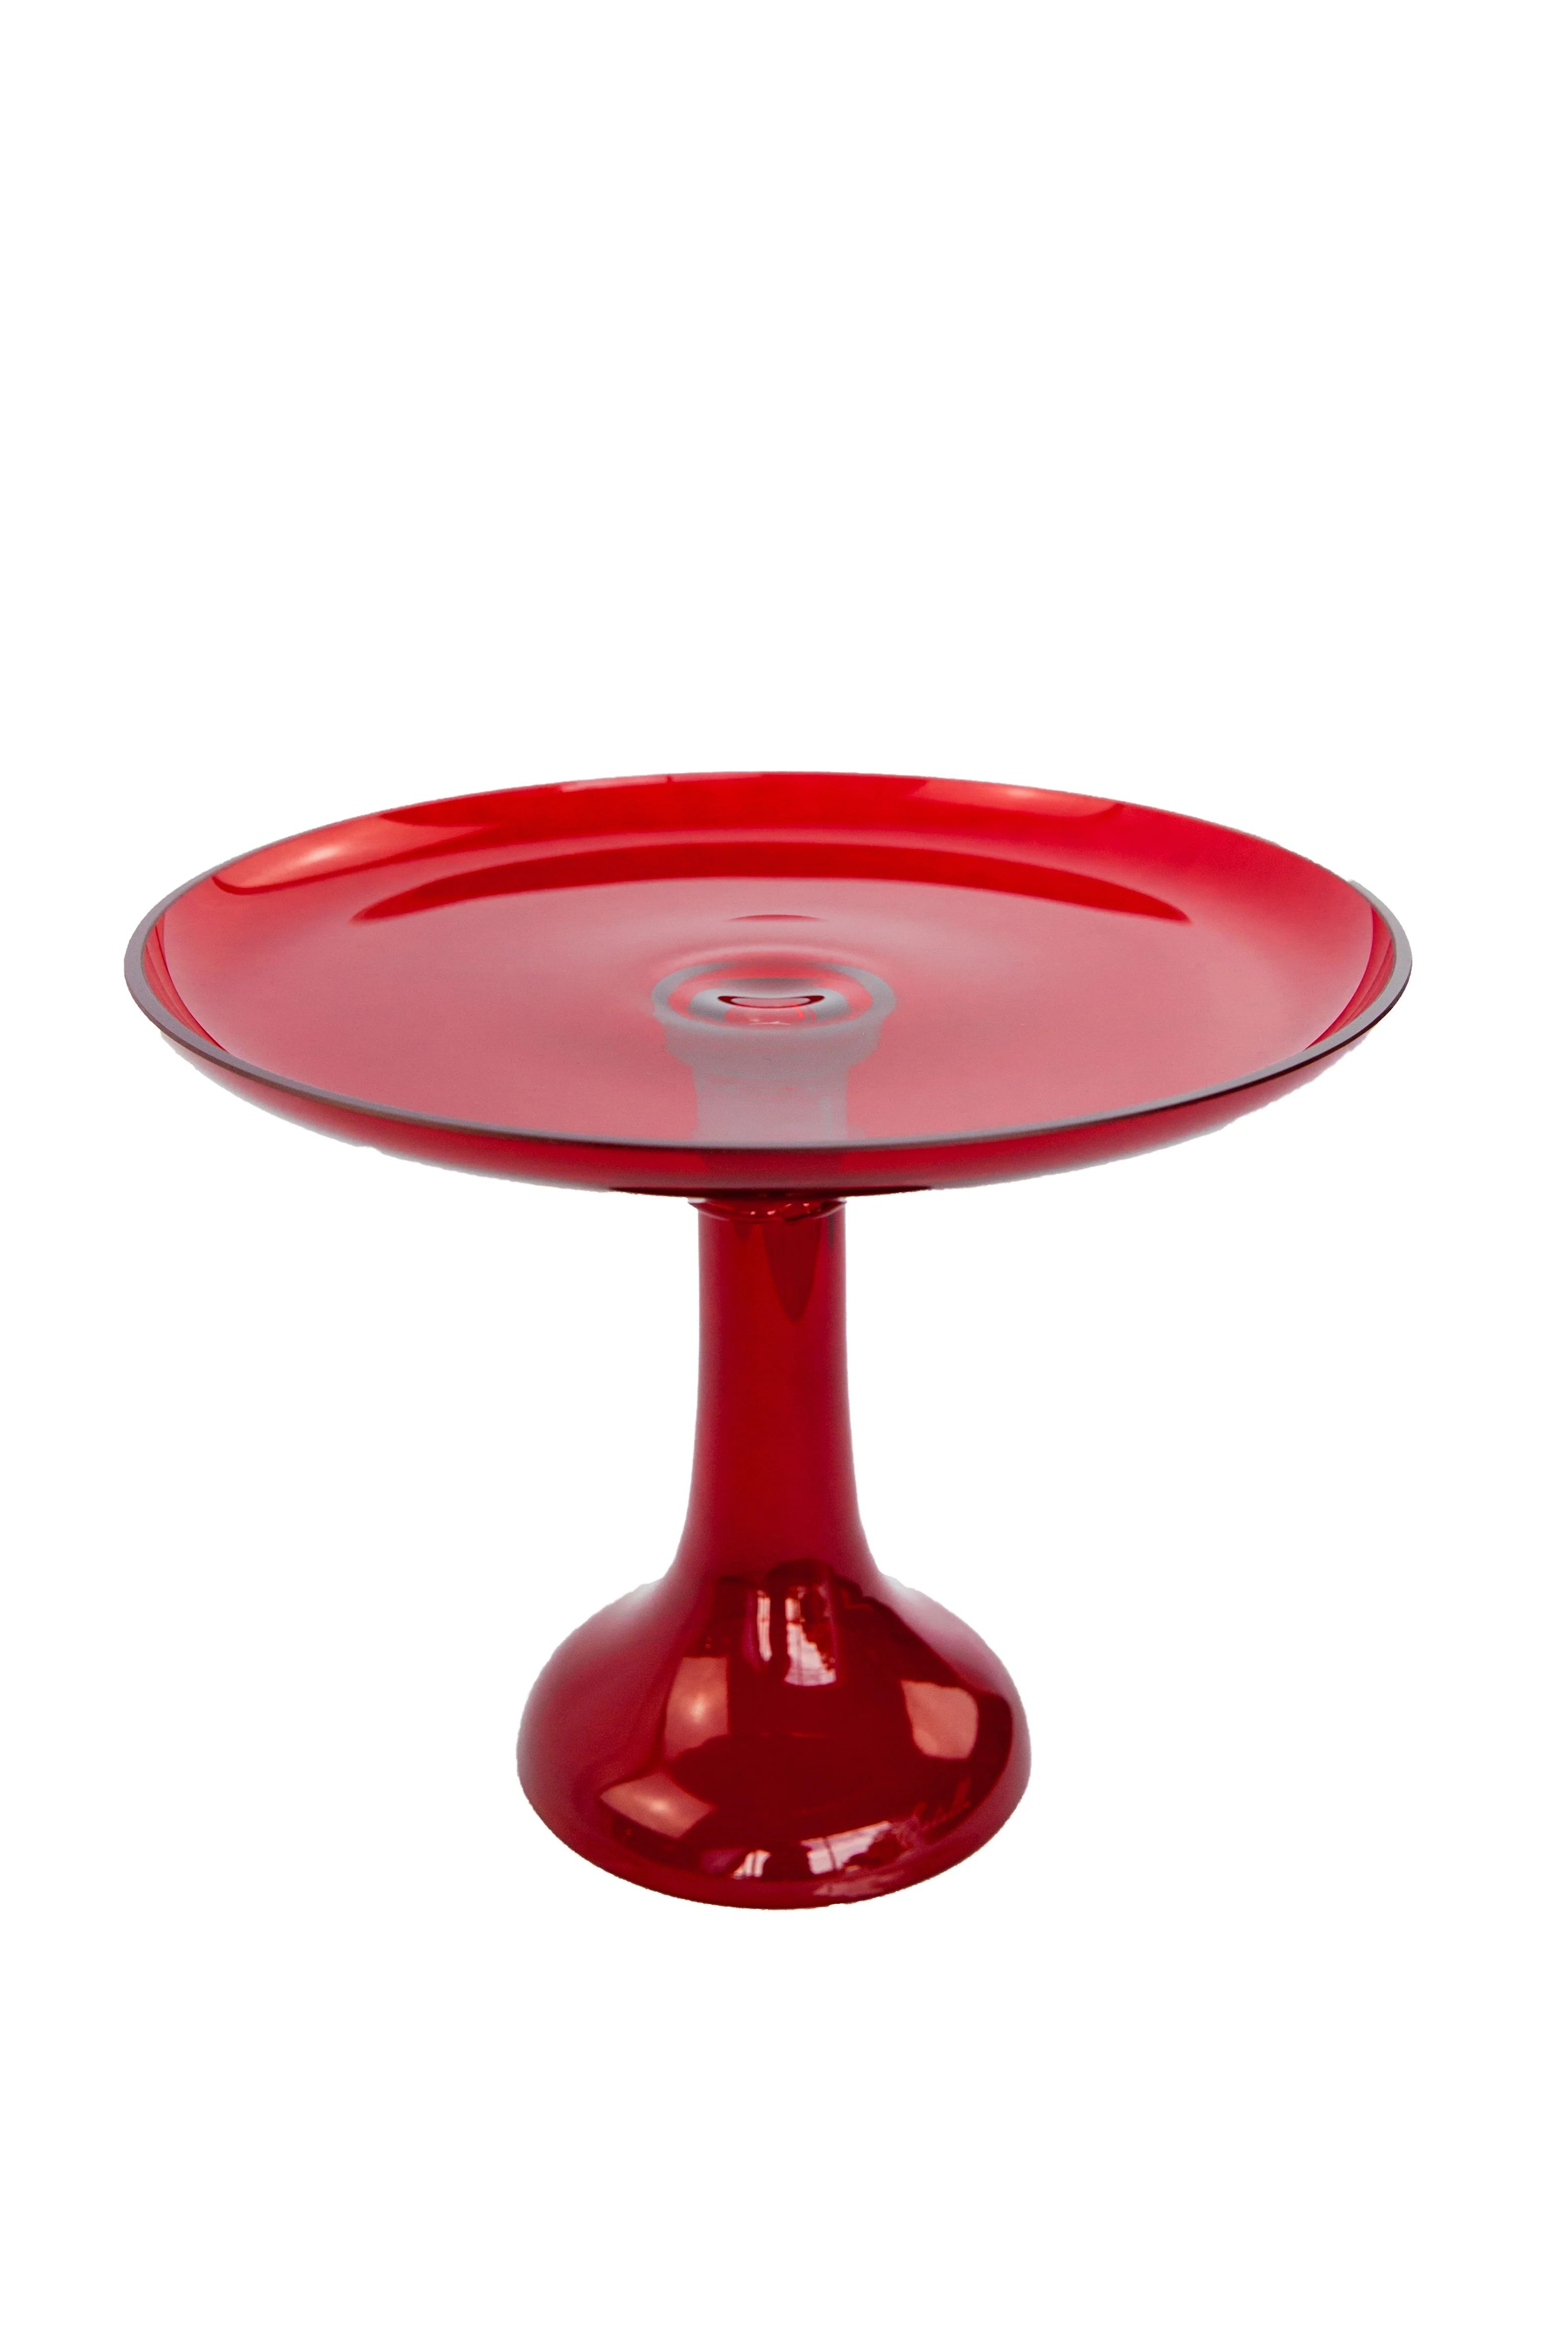 Colored Glass Cake Stand | Ashley Stark Home